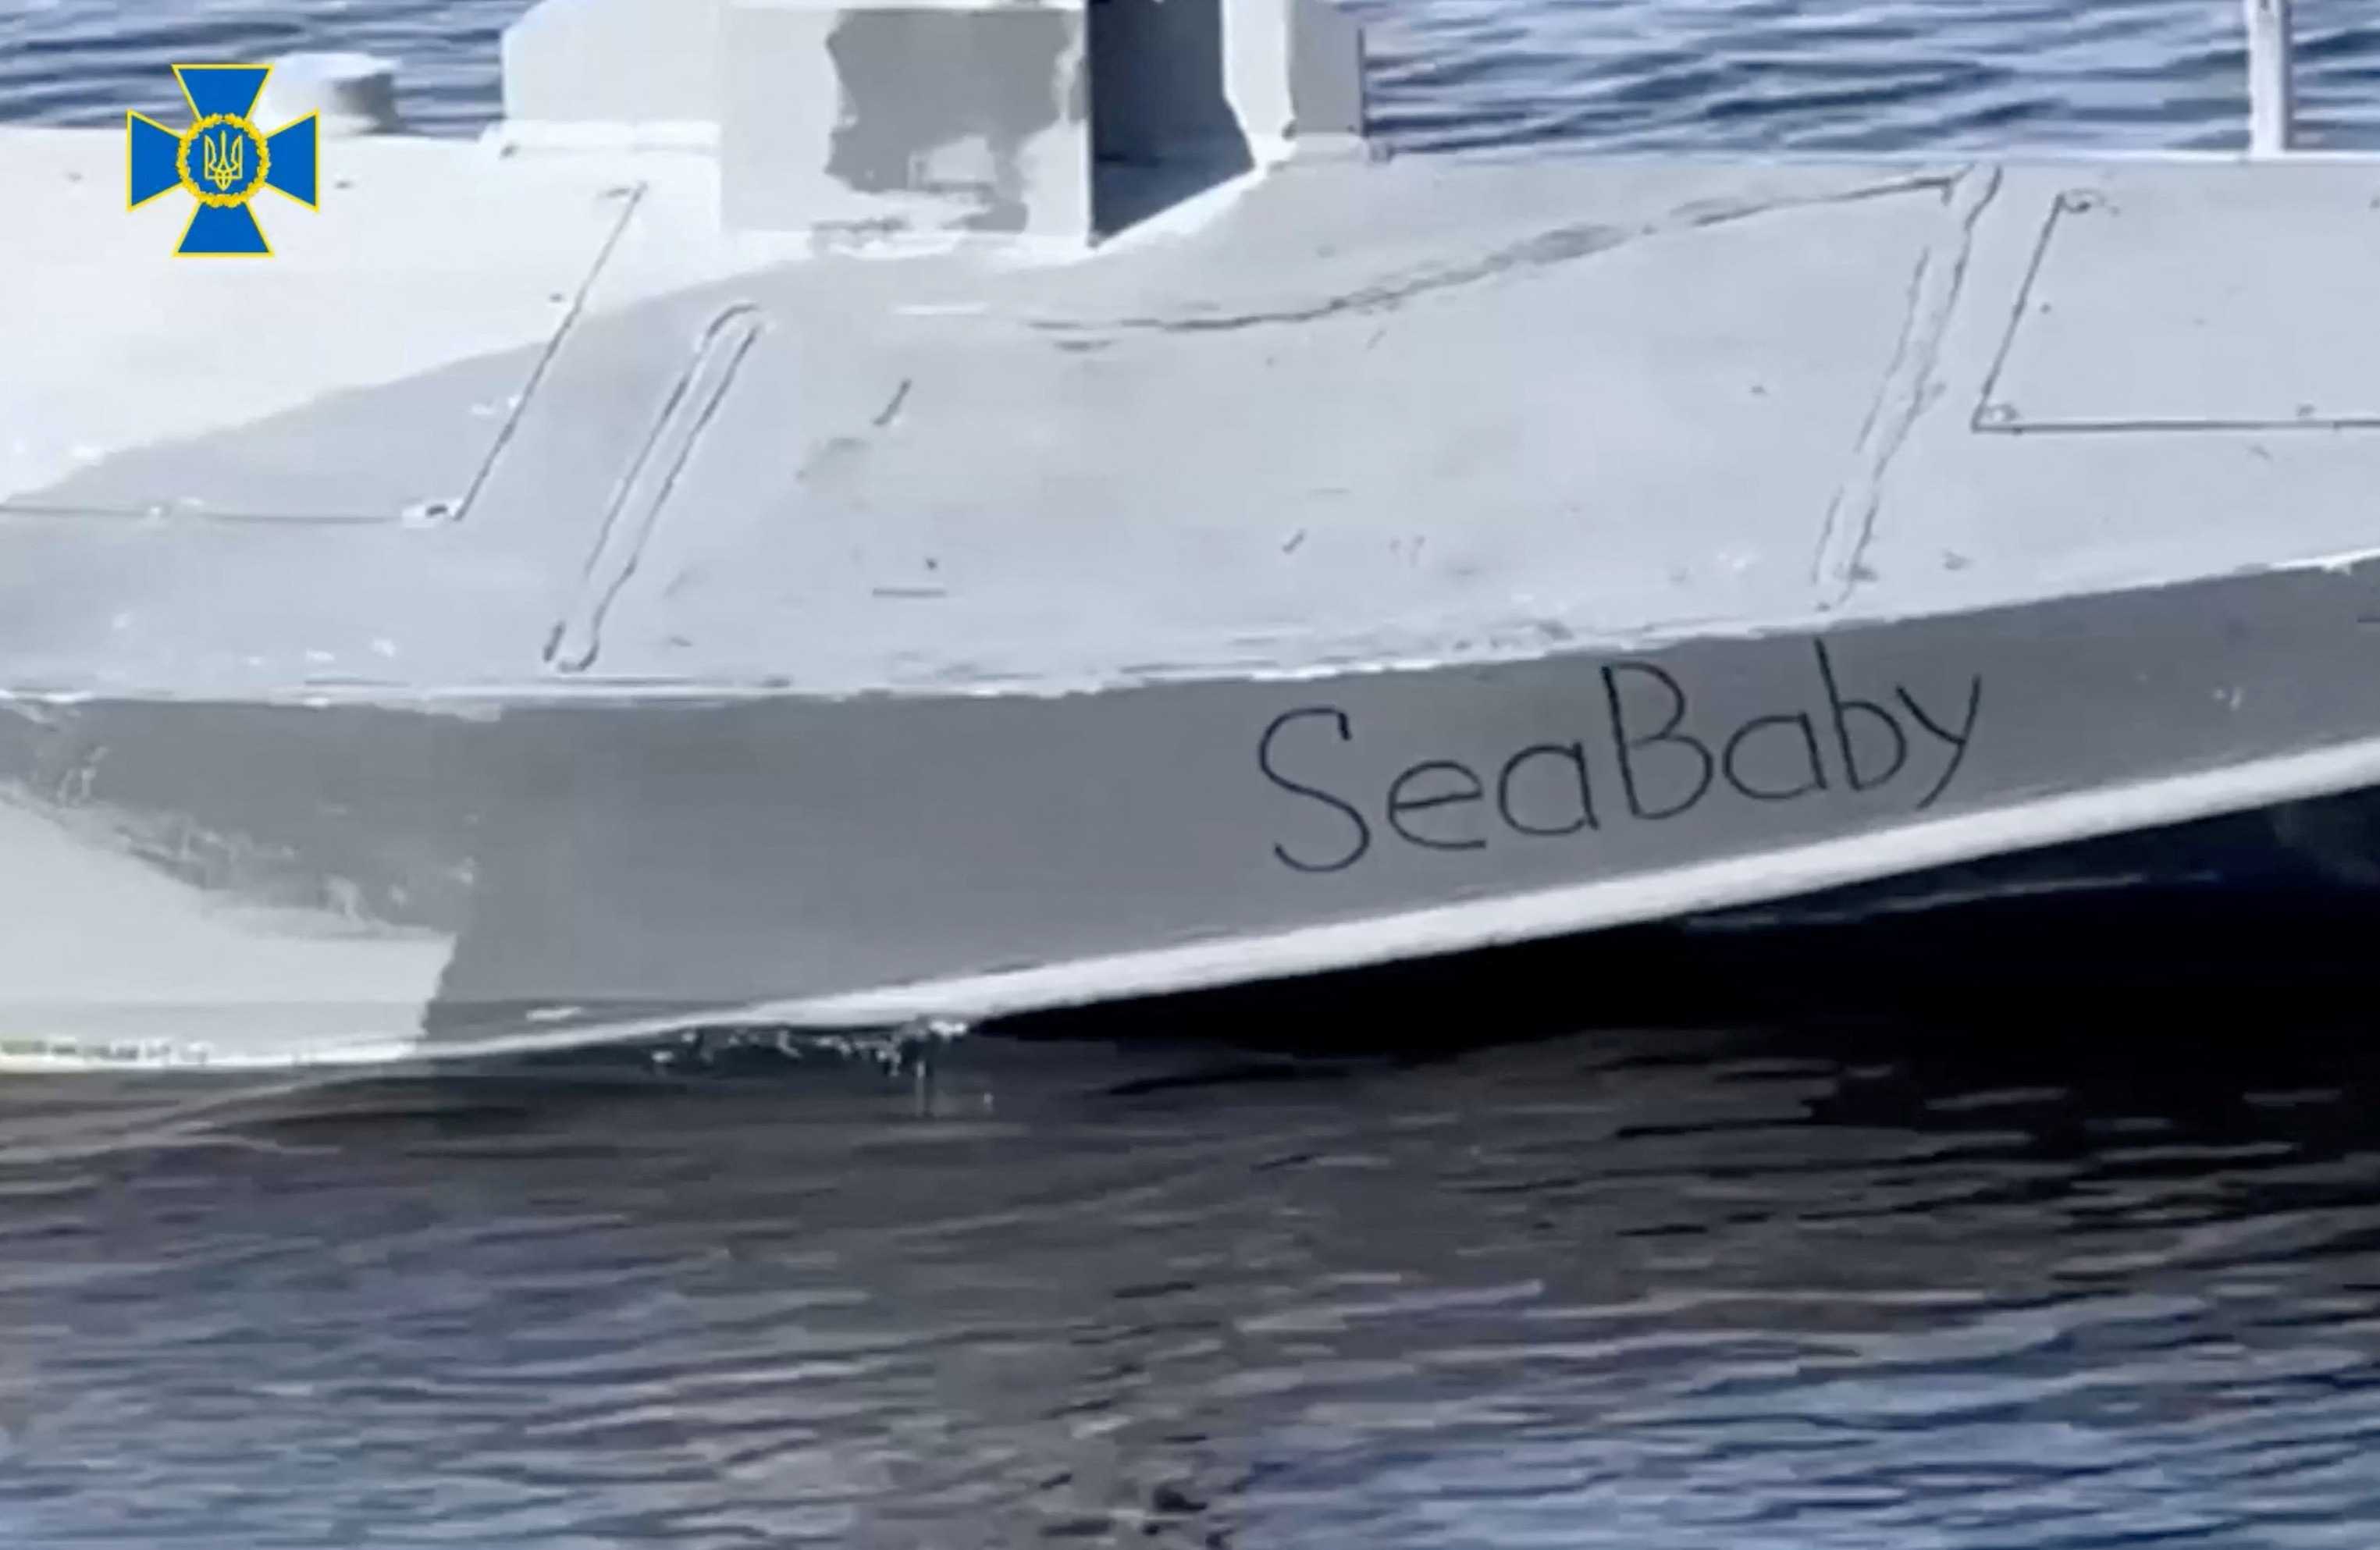 The drone is nicknamed Sea Baby